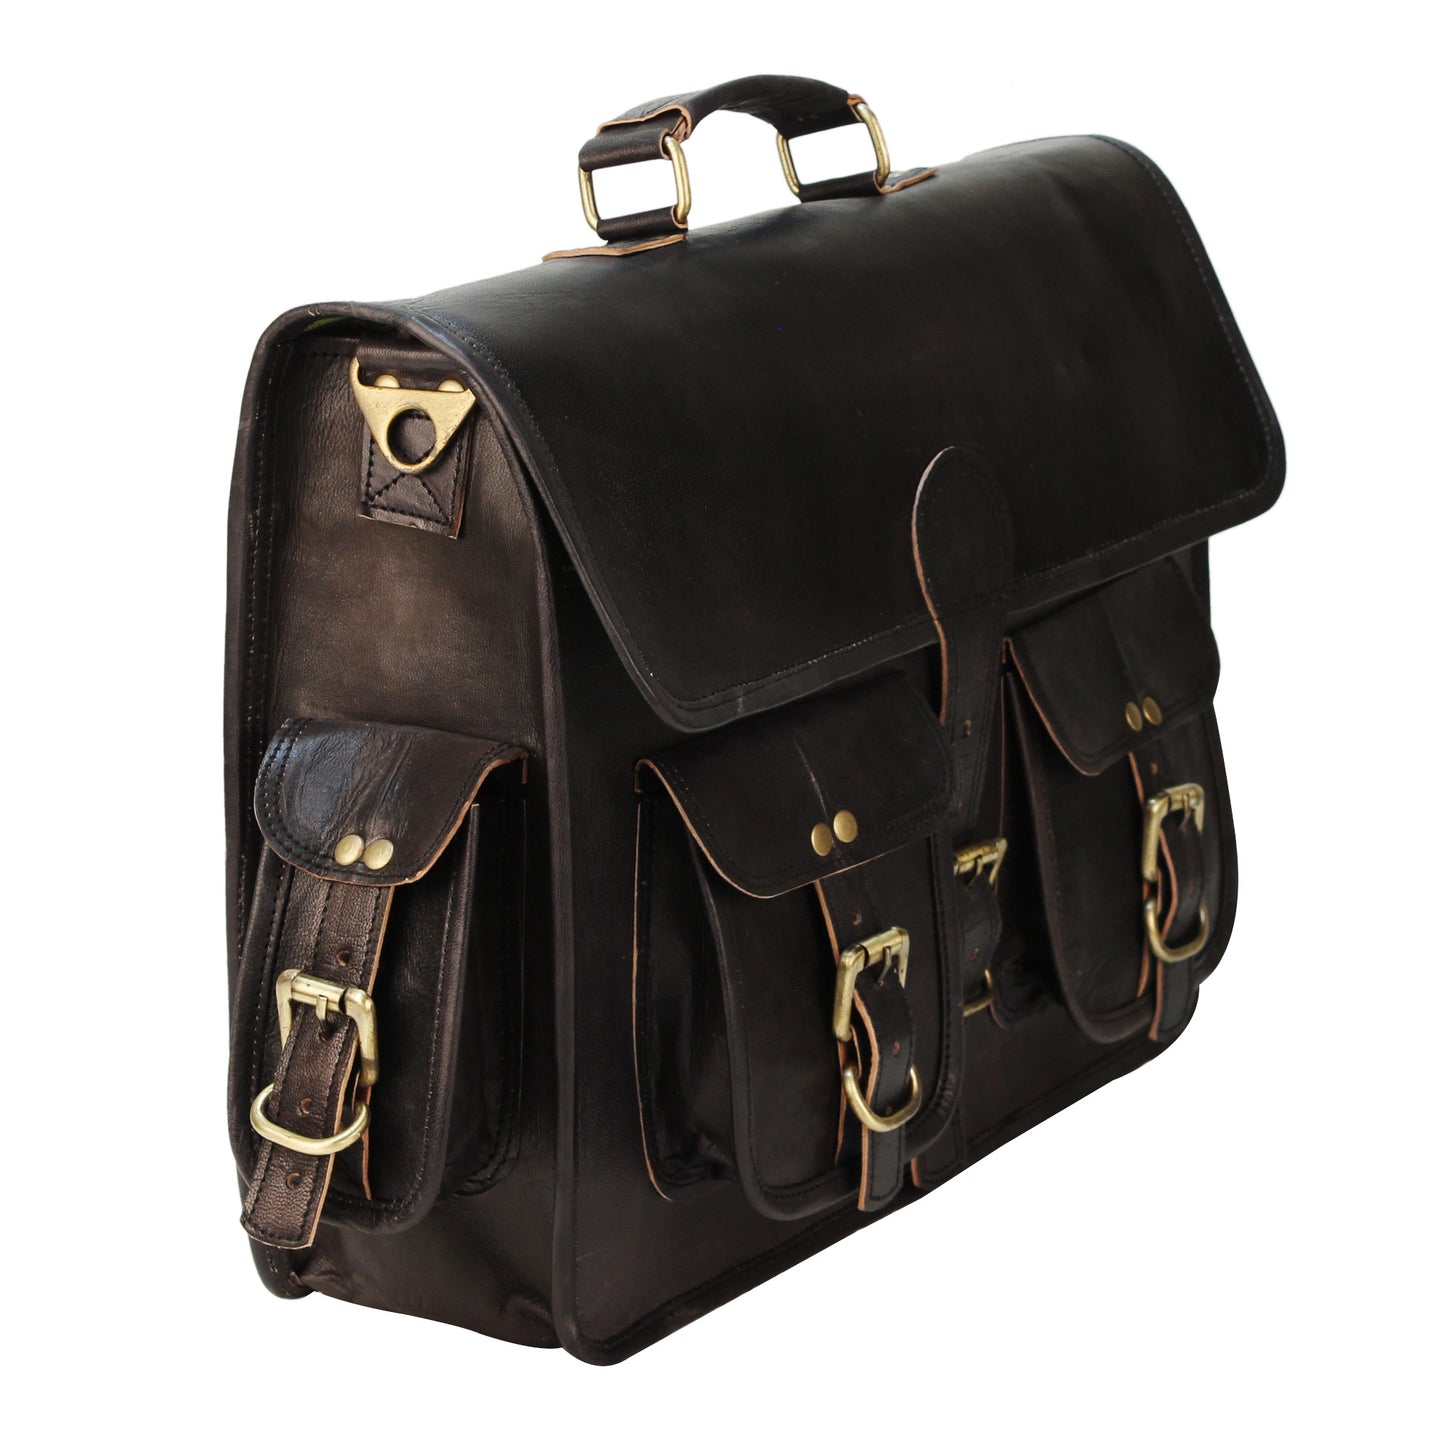 Full Grain Leather Bag with Top Handle